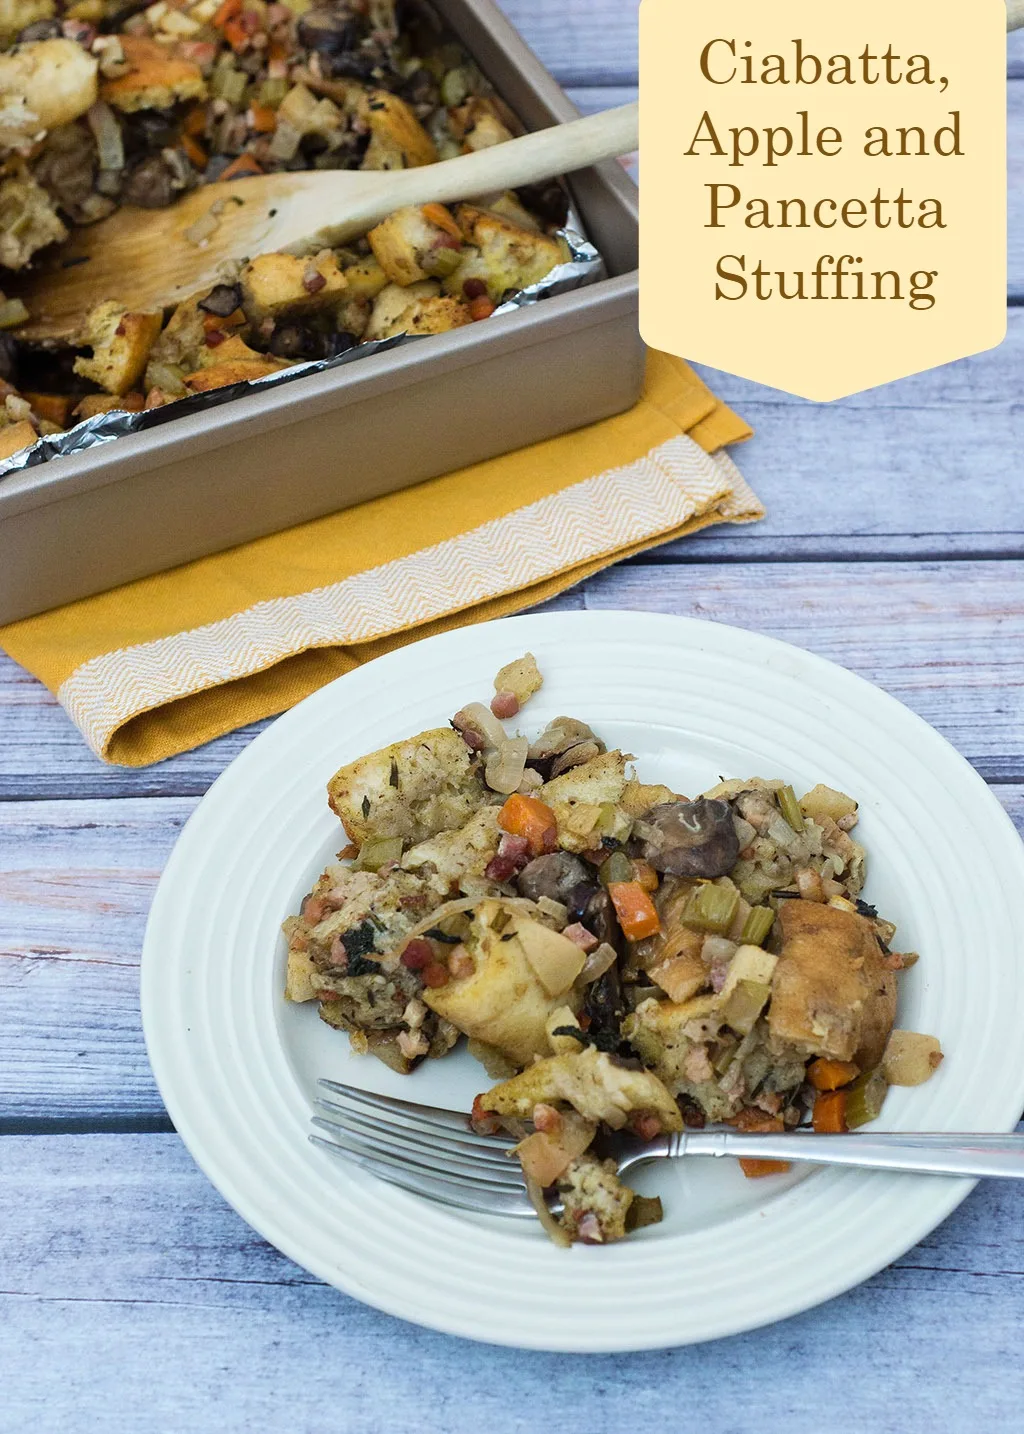 This Thanksgiving stuffing is packed full of flavor, from the #LaBreaBakery bread, to the veggies, to the cinnamon-coated apples. Make it ahead of time, then crisp the top in the oven while your turkey rests. 